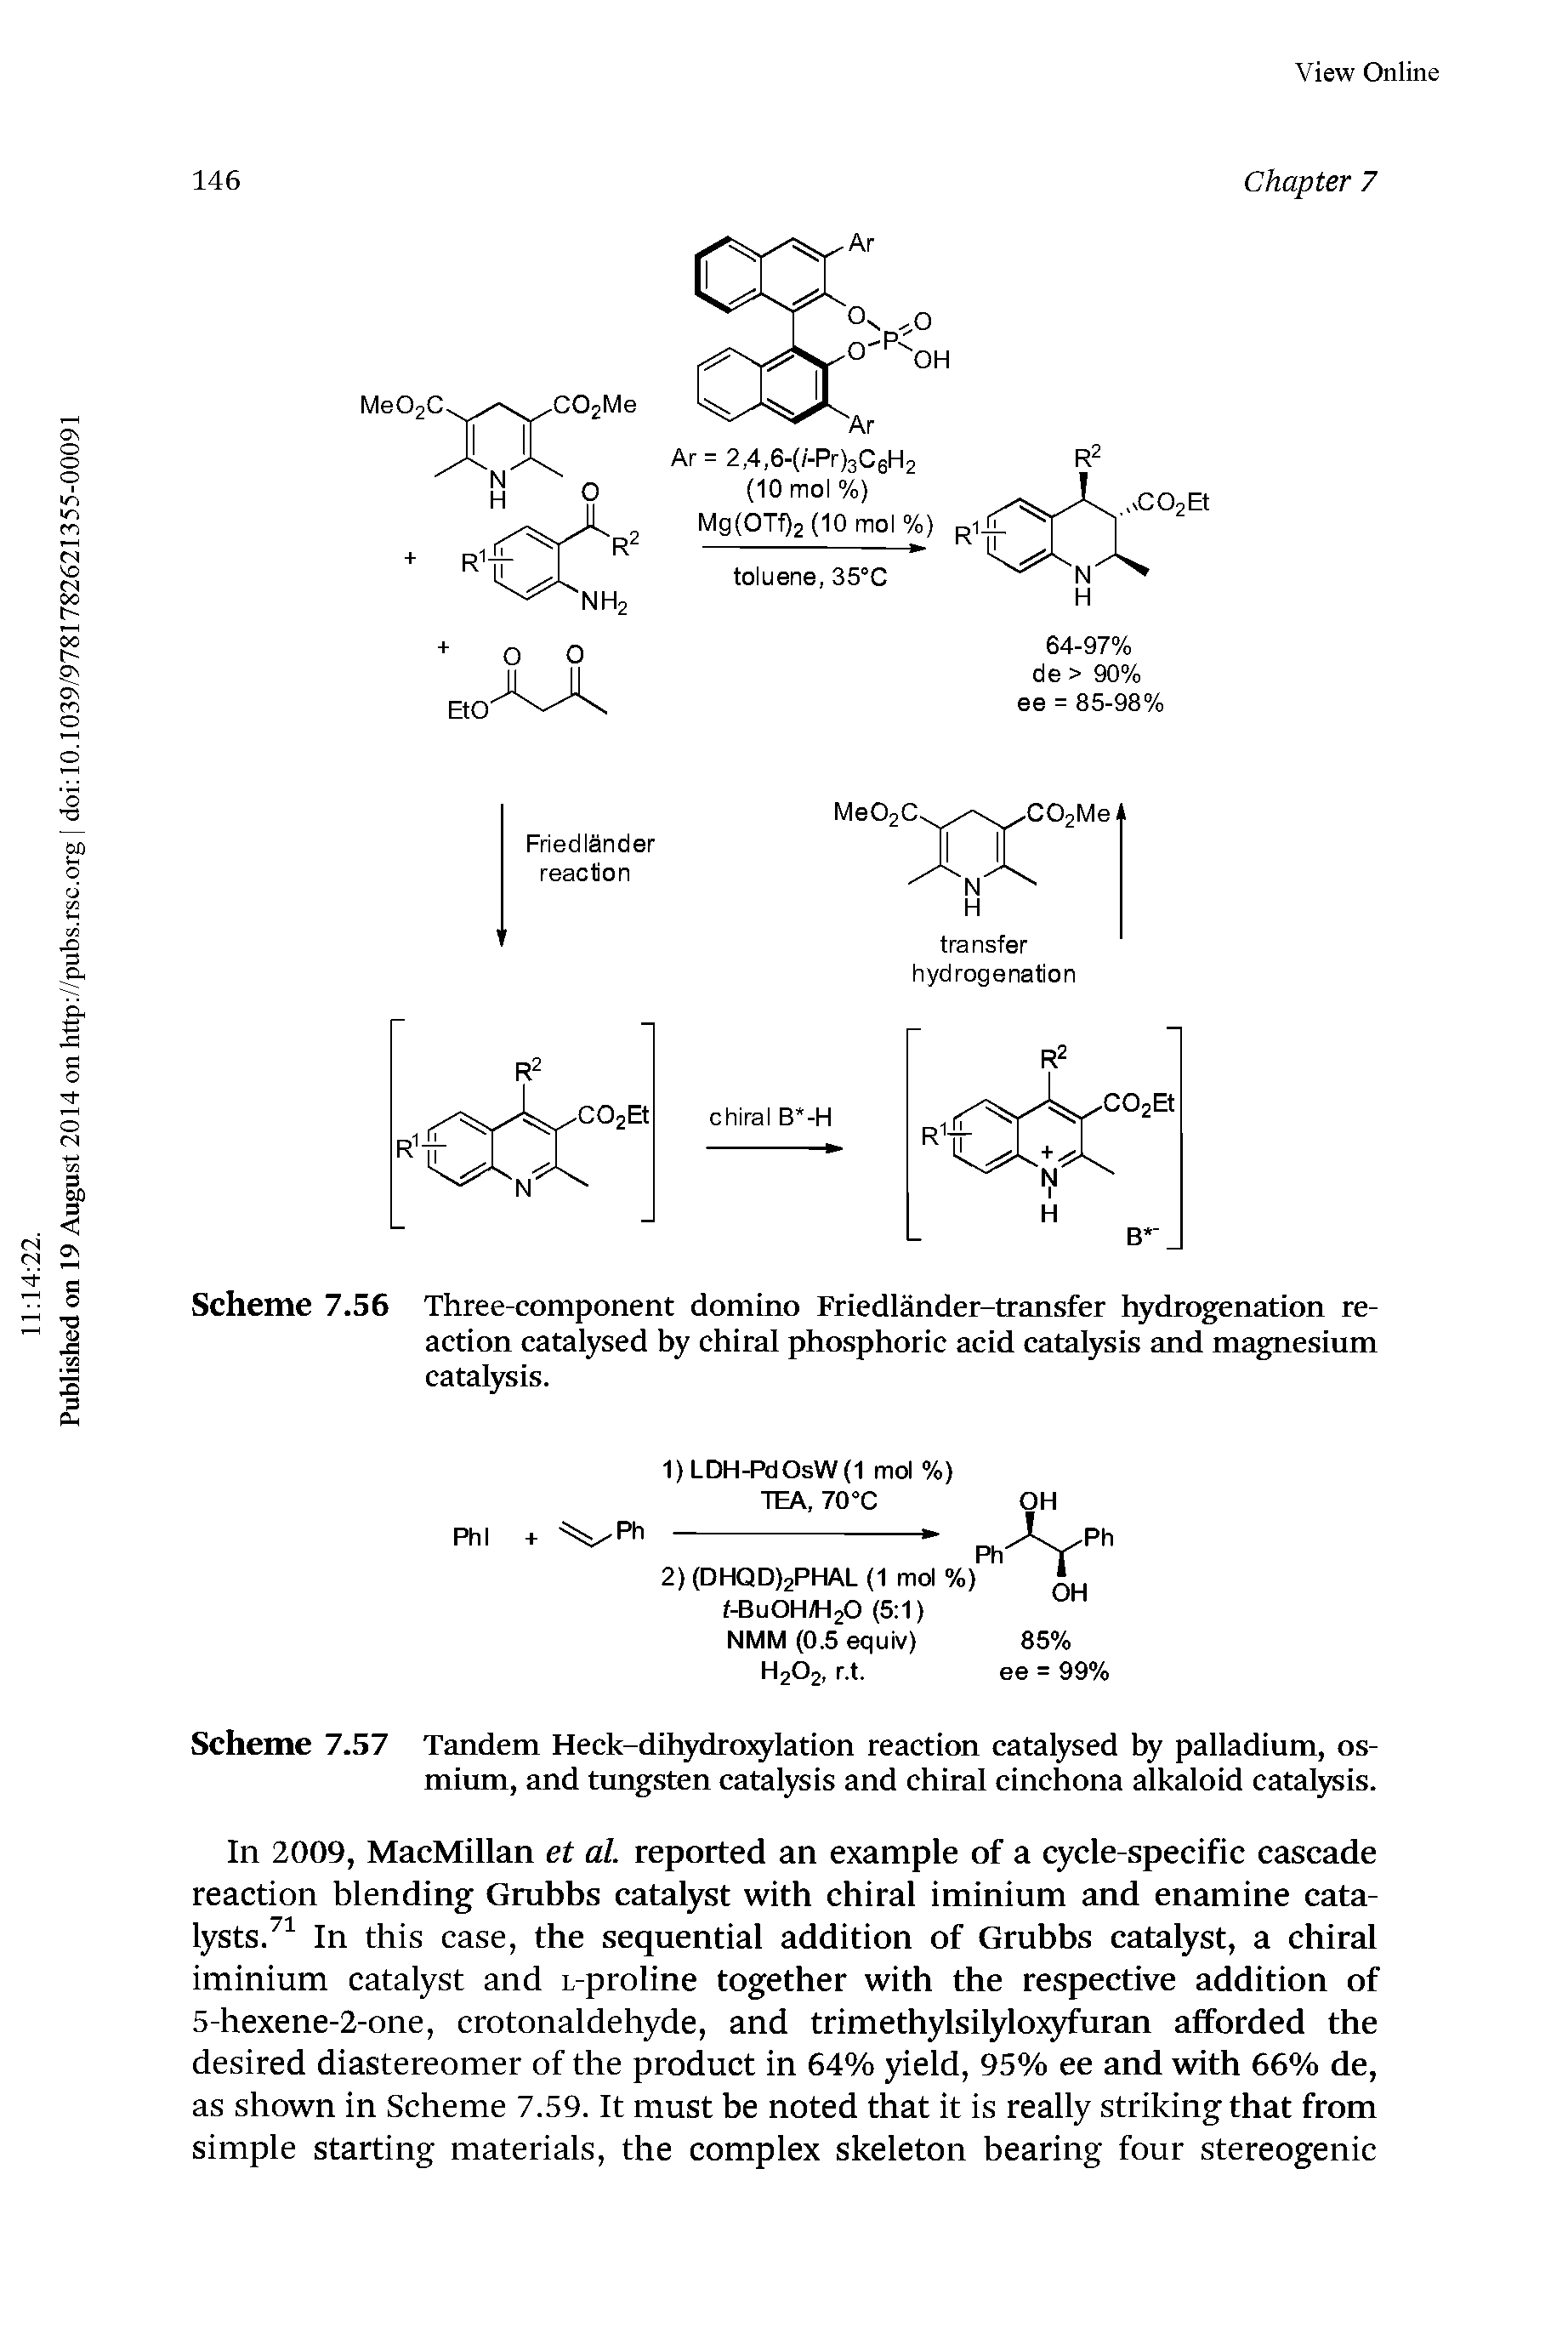 Scheme 7.57 Tandem Heck-dihydrotylation reaction catalysed by palladium, osmium, and tungsten catalysis and chiral cinchona alkaloid catalysis.